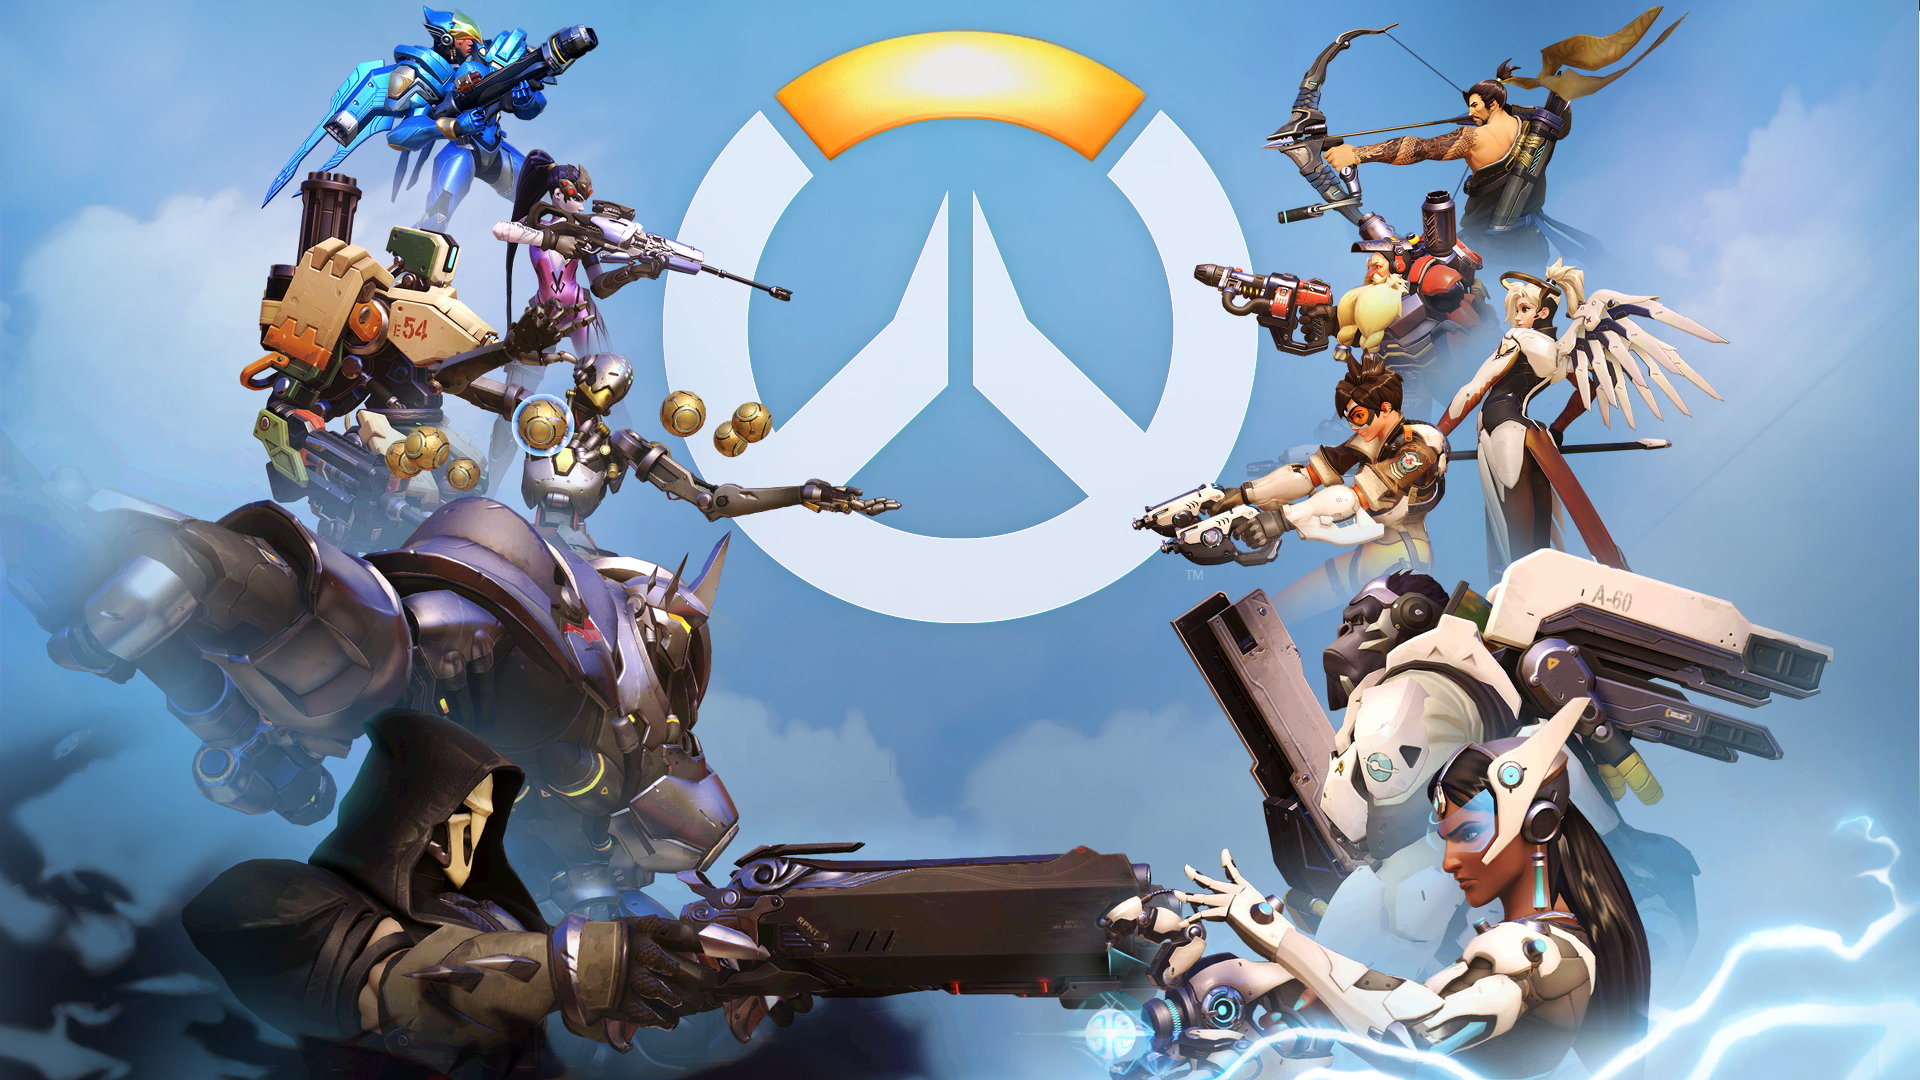 Overwatch (May 24th)